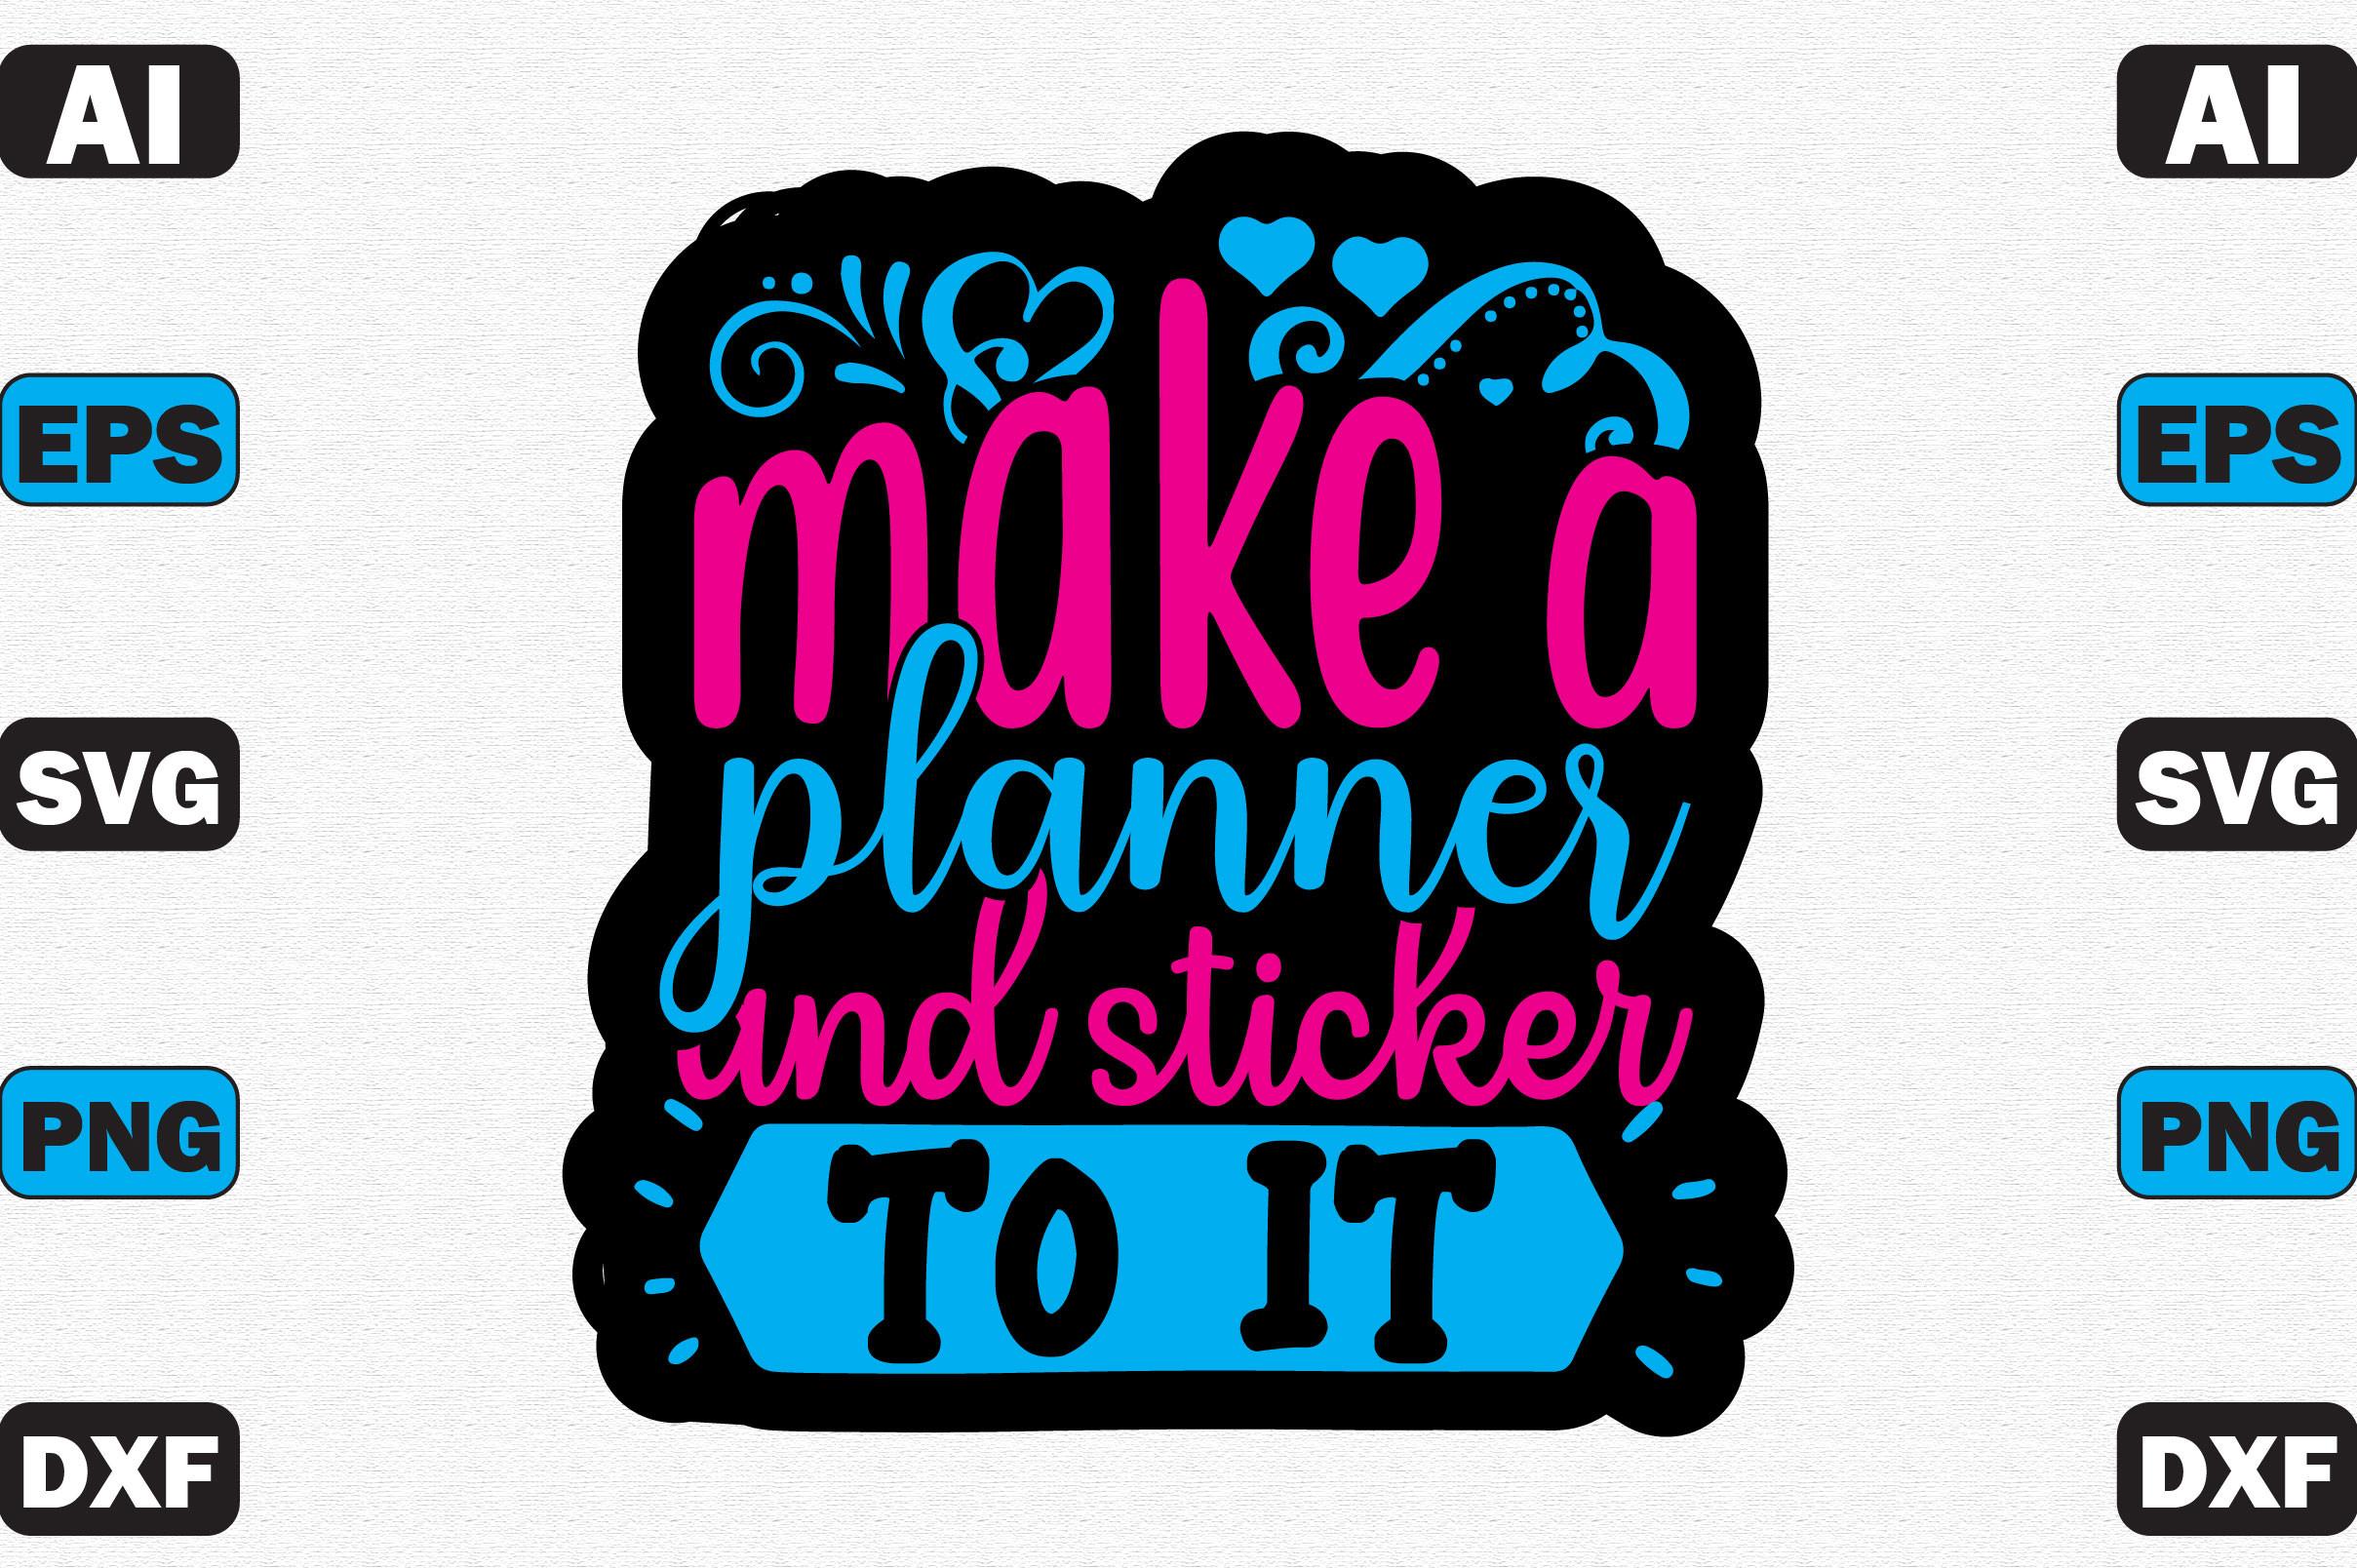 Make a Planner and Sticker to It